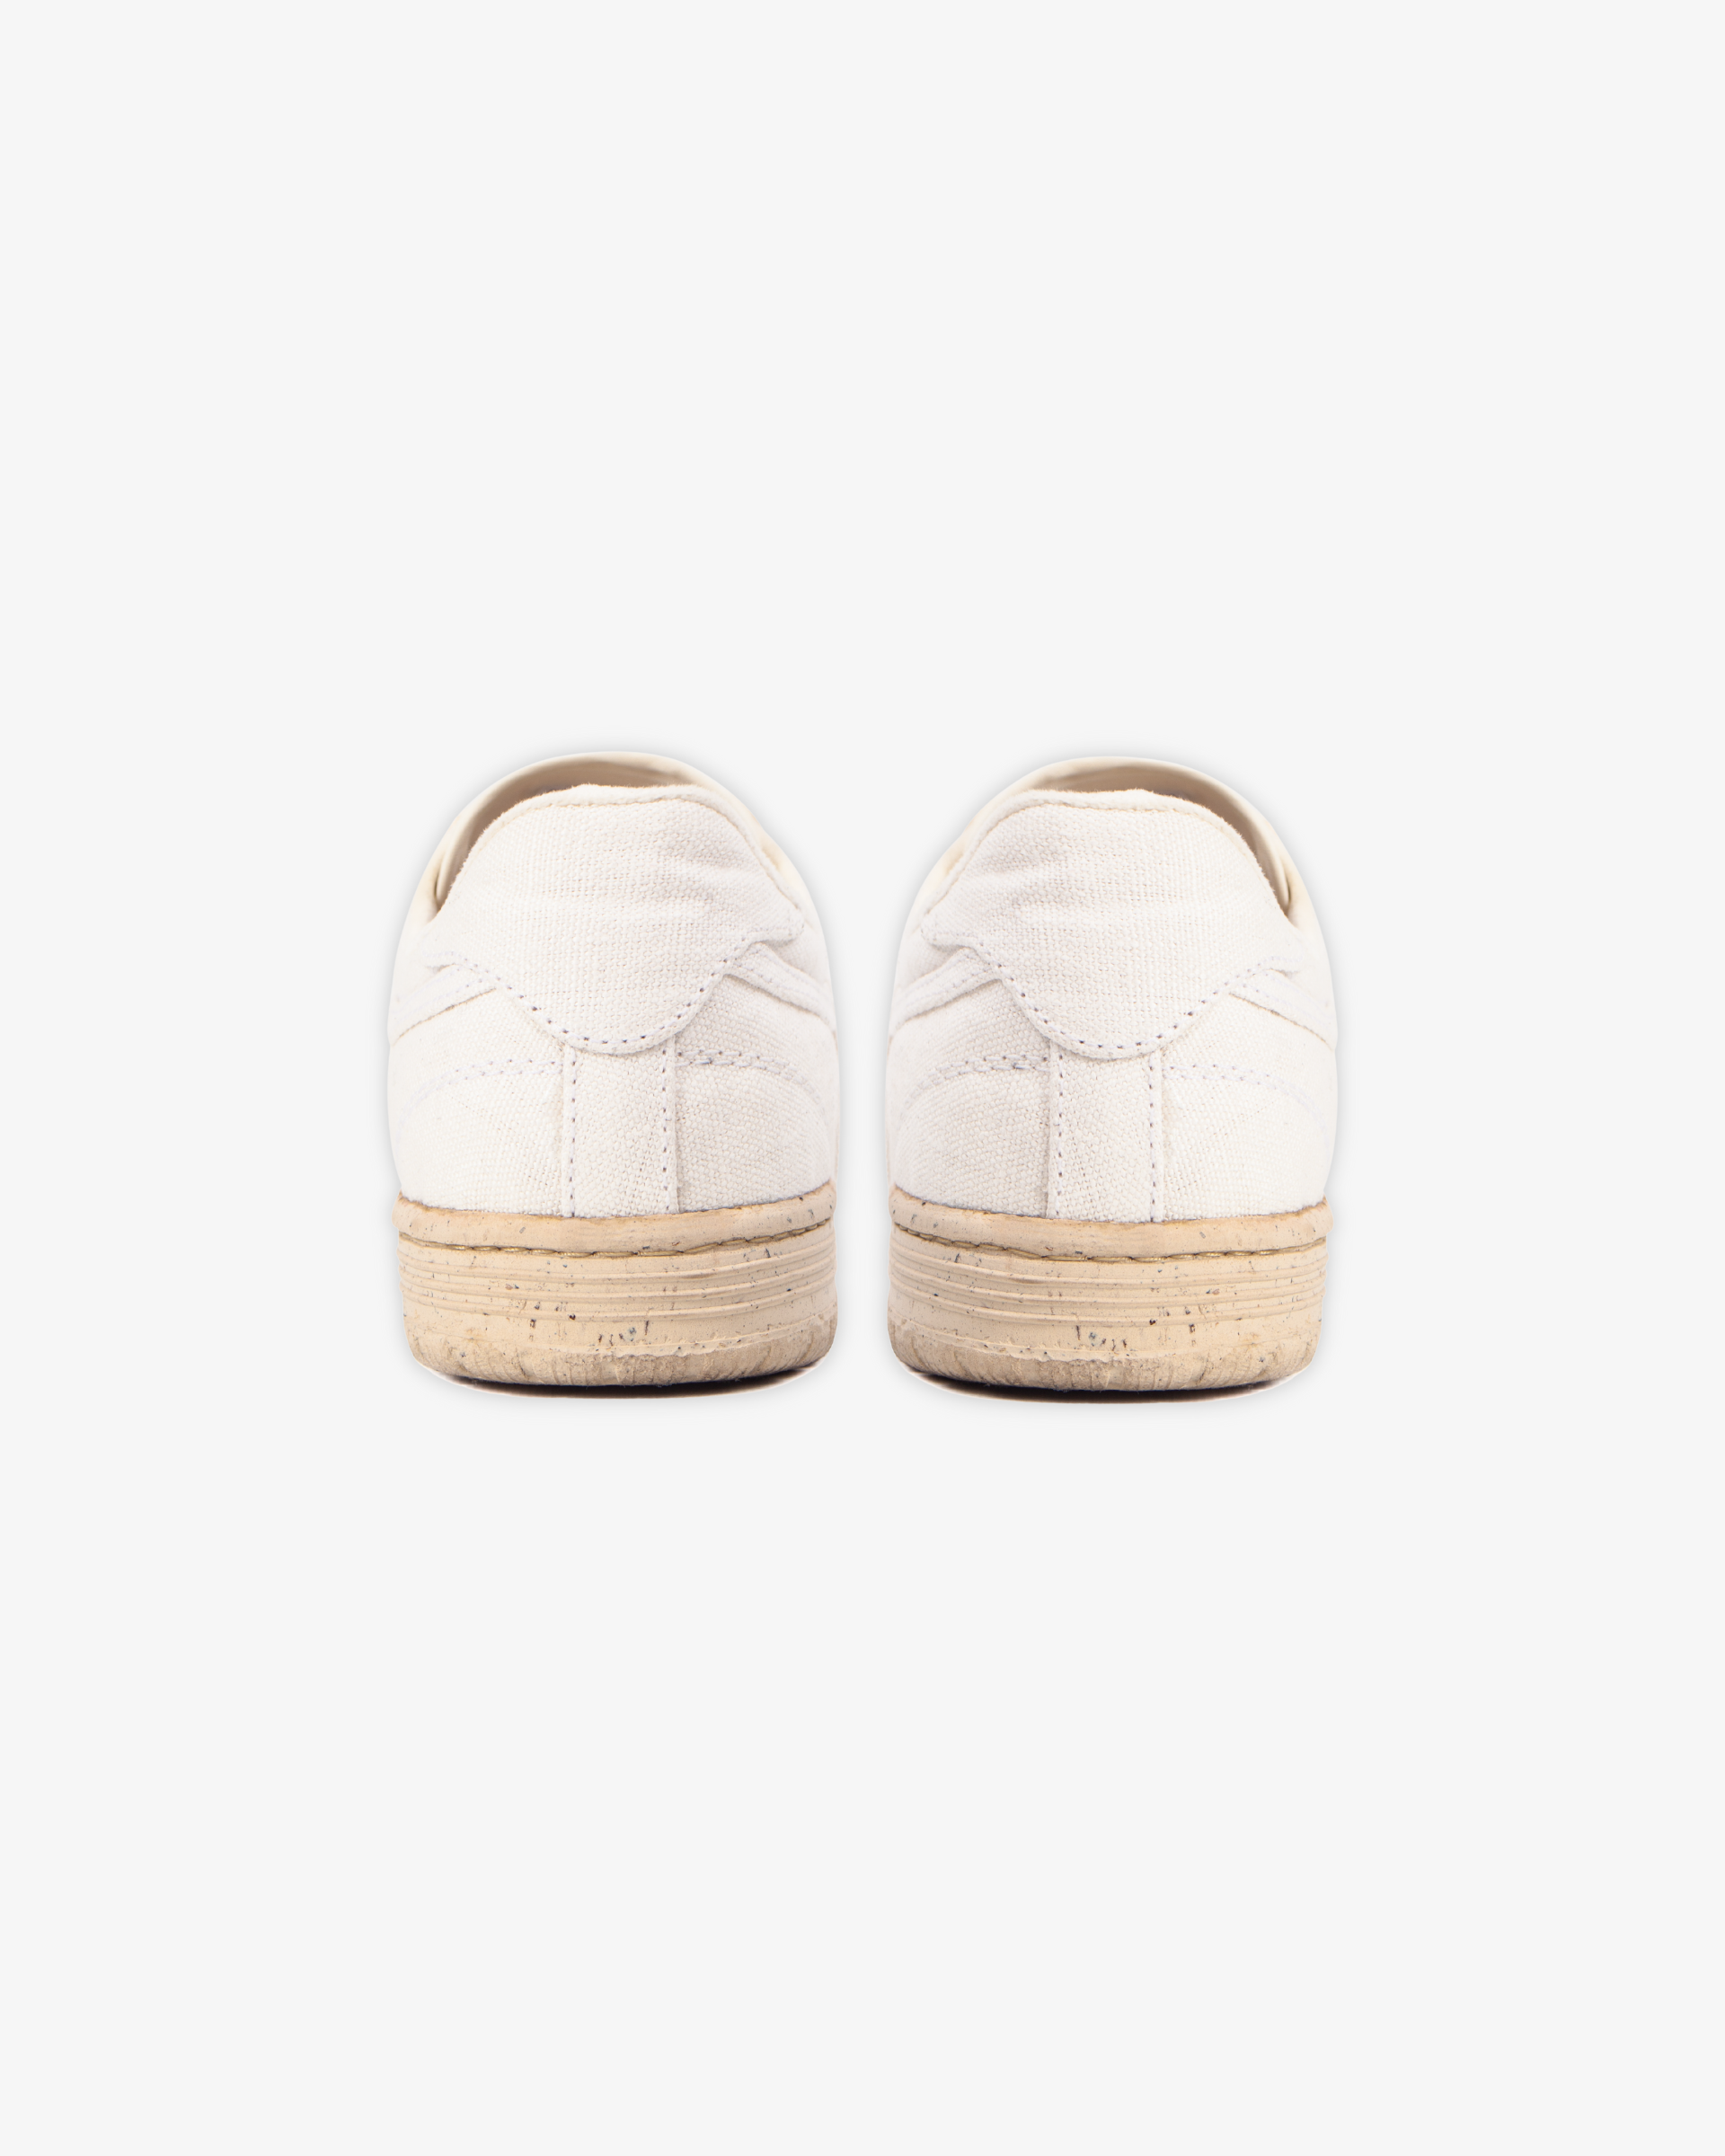 HEMP WOMEN'S EXPEDITION SNEAKERS - WHITE (WOMAN)